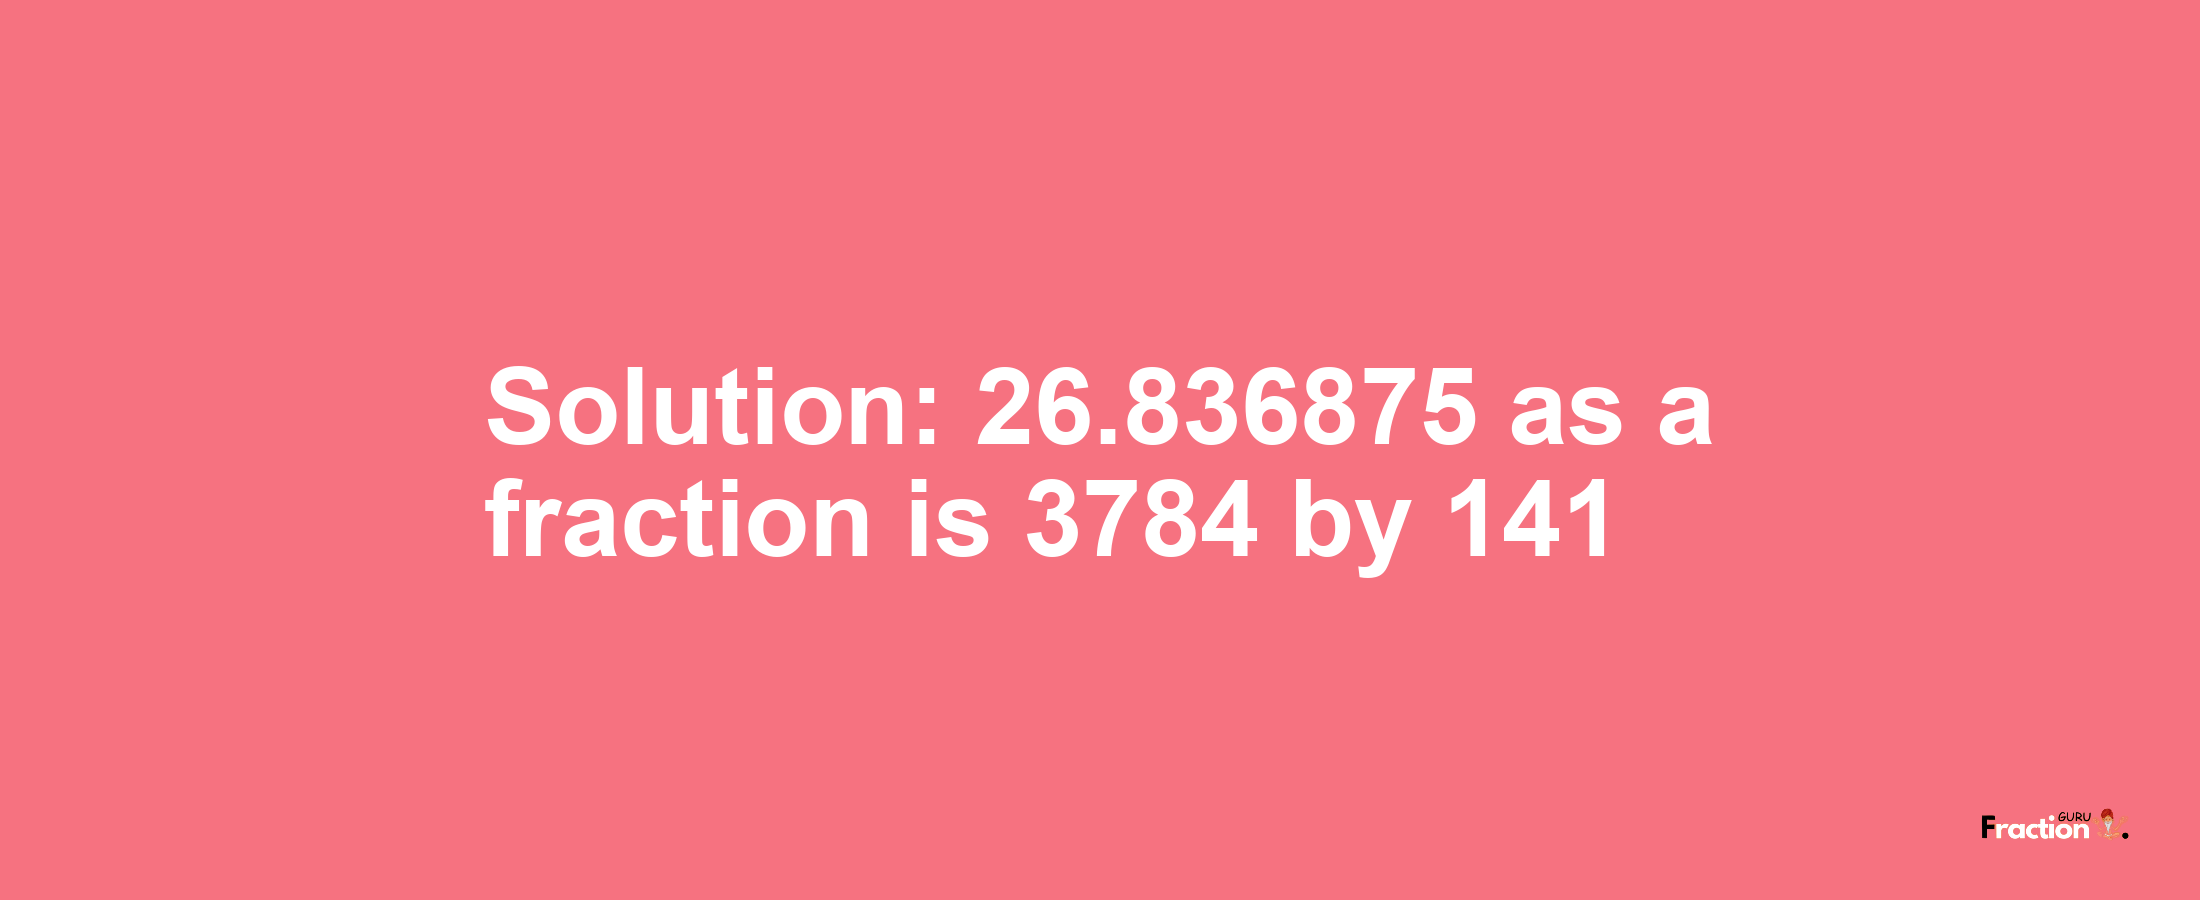 Solution:26.836875 as a fraction is 3784/141